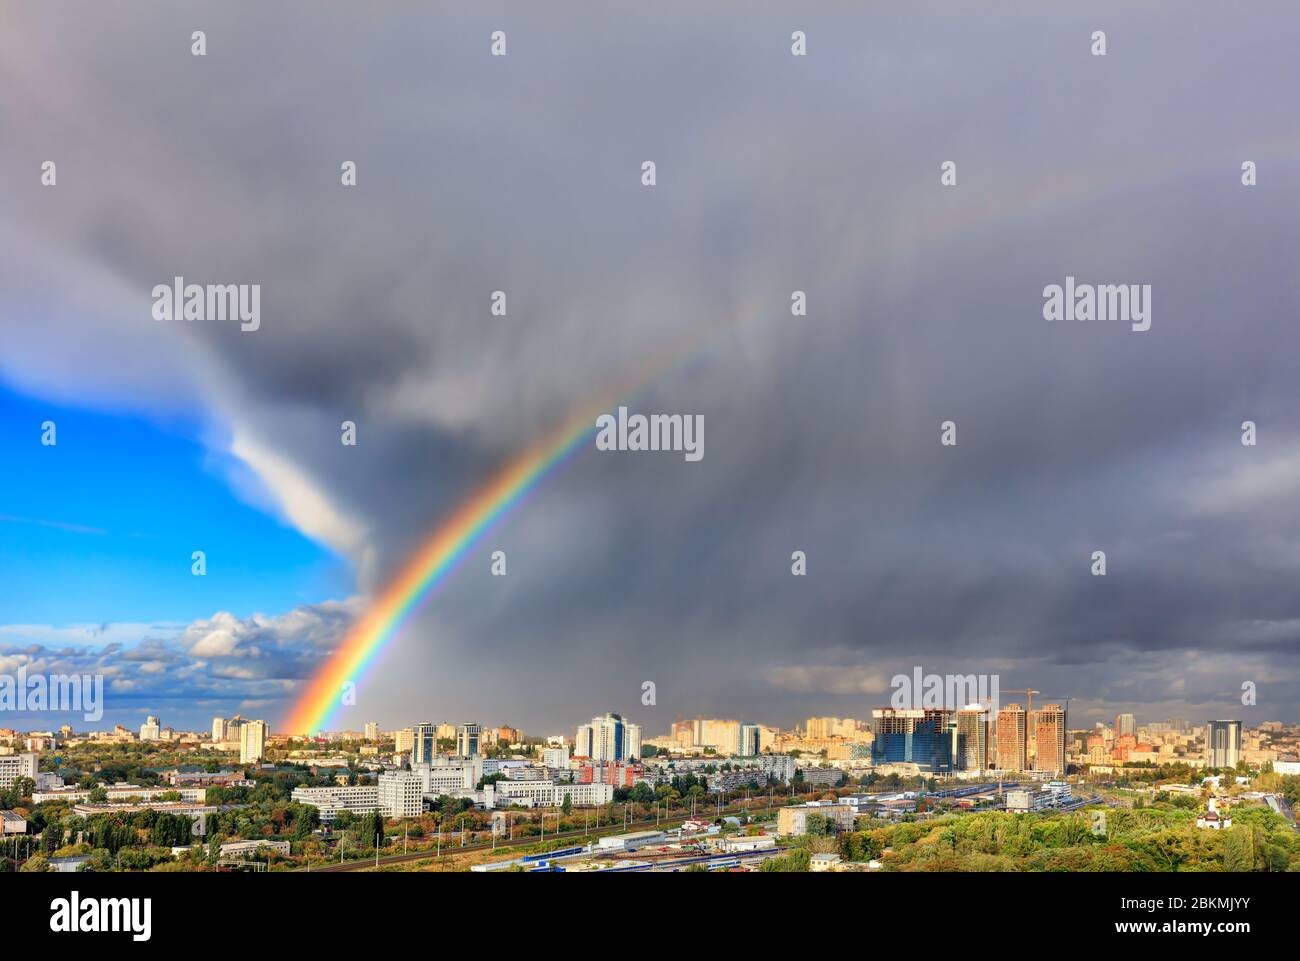 A bright rainbow in the sky above urban houses, sunlight displaces a thunderous front revealing a blue sky. The concept of change for the better. Stock Photo